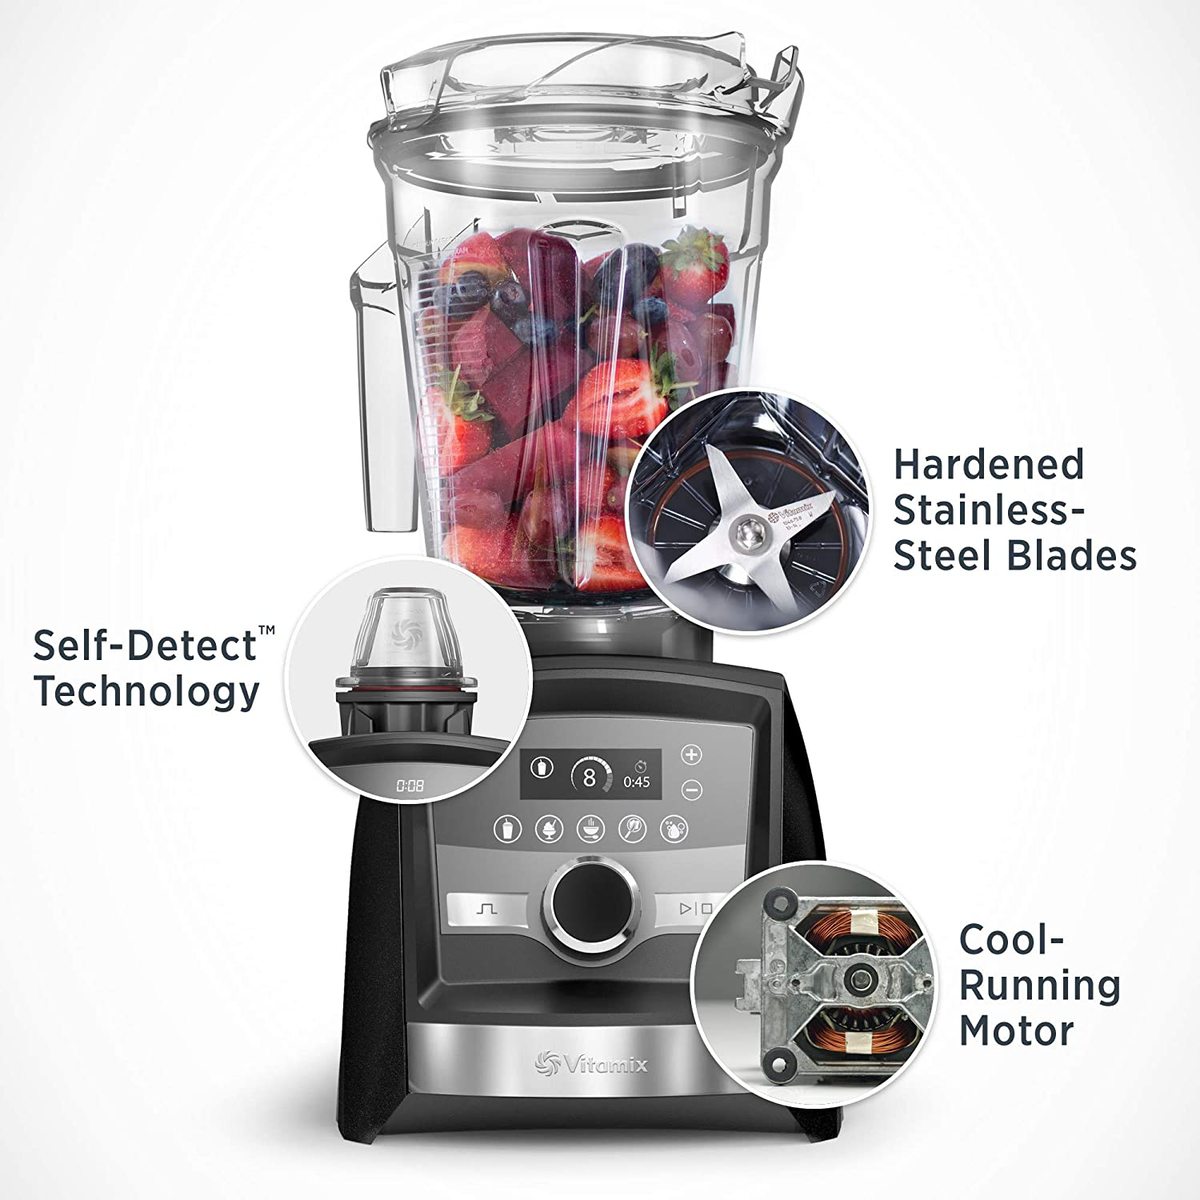 Vitamix blender filled with berries